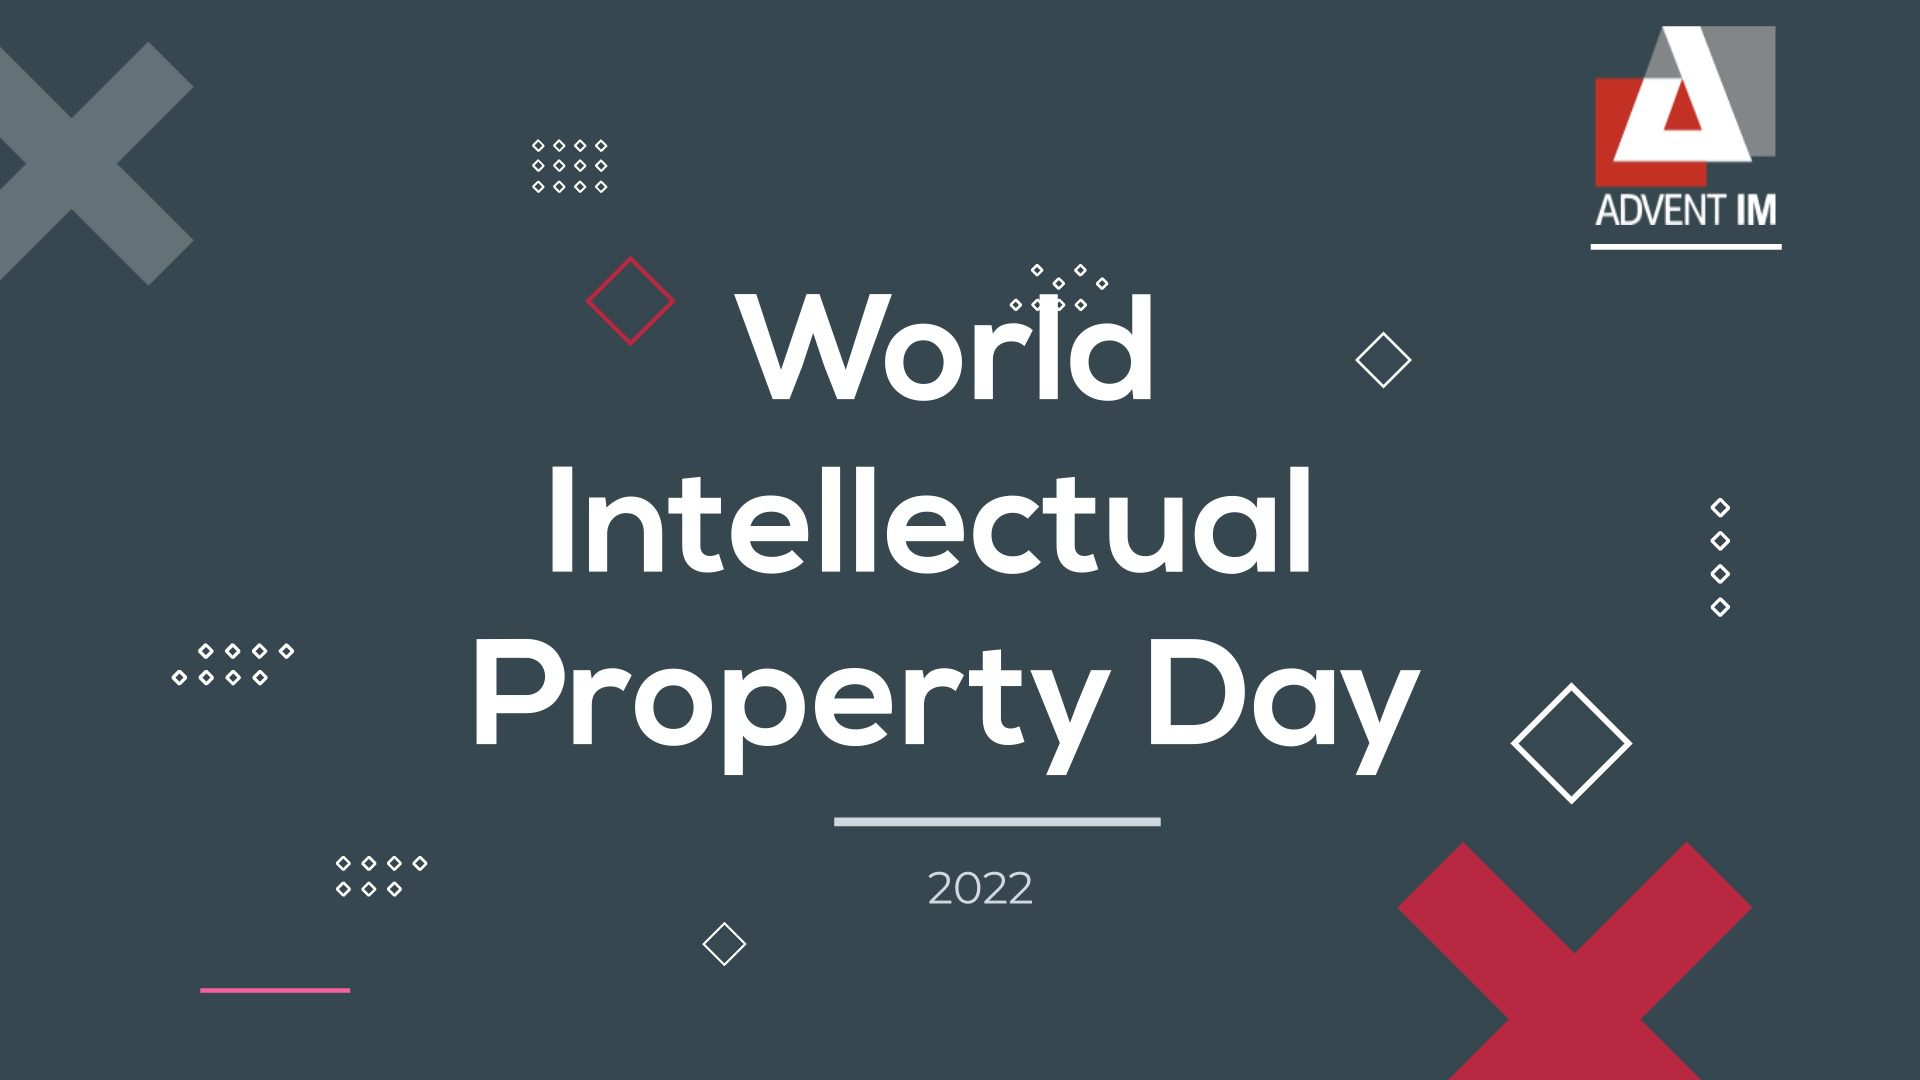 Advent IM Intellectual property day